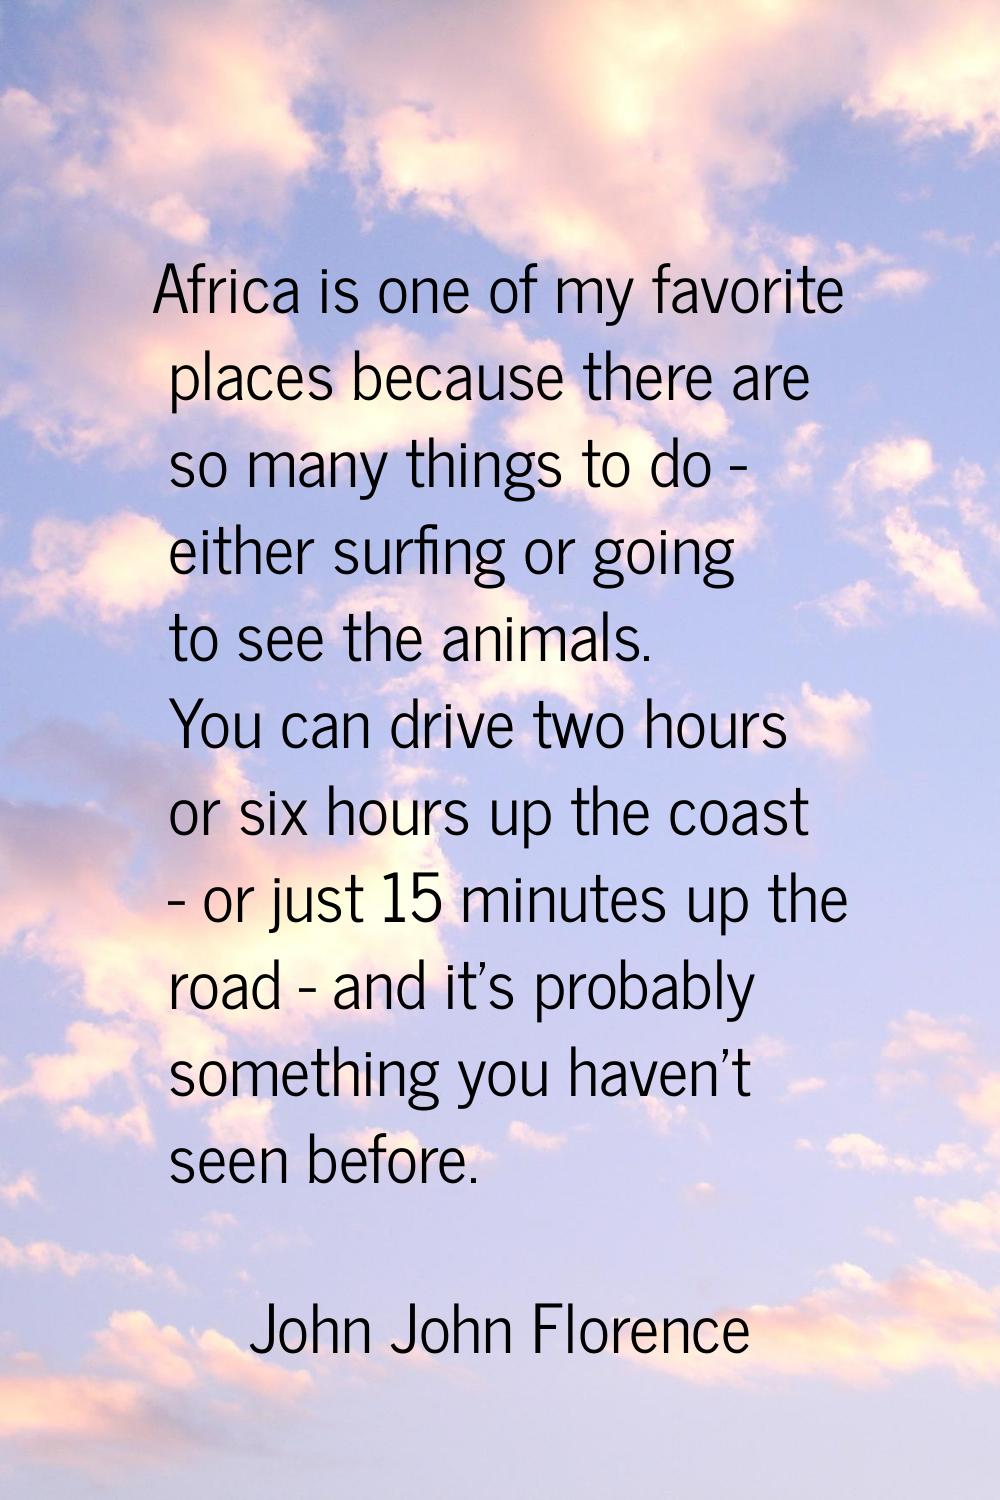 Africa is one of my favorite places because there are so many things to do - either surfing or goin